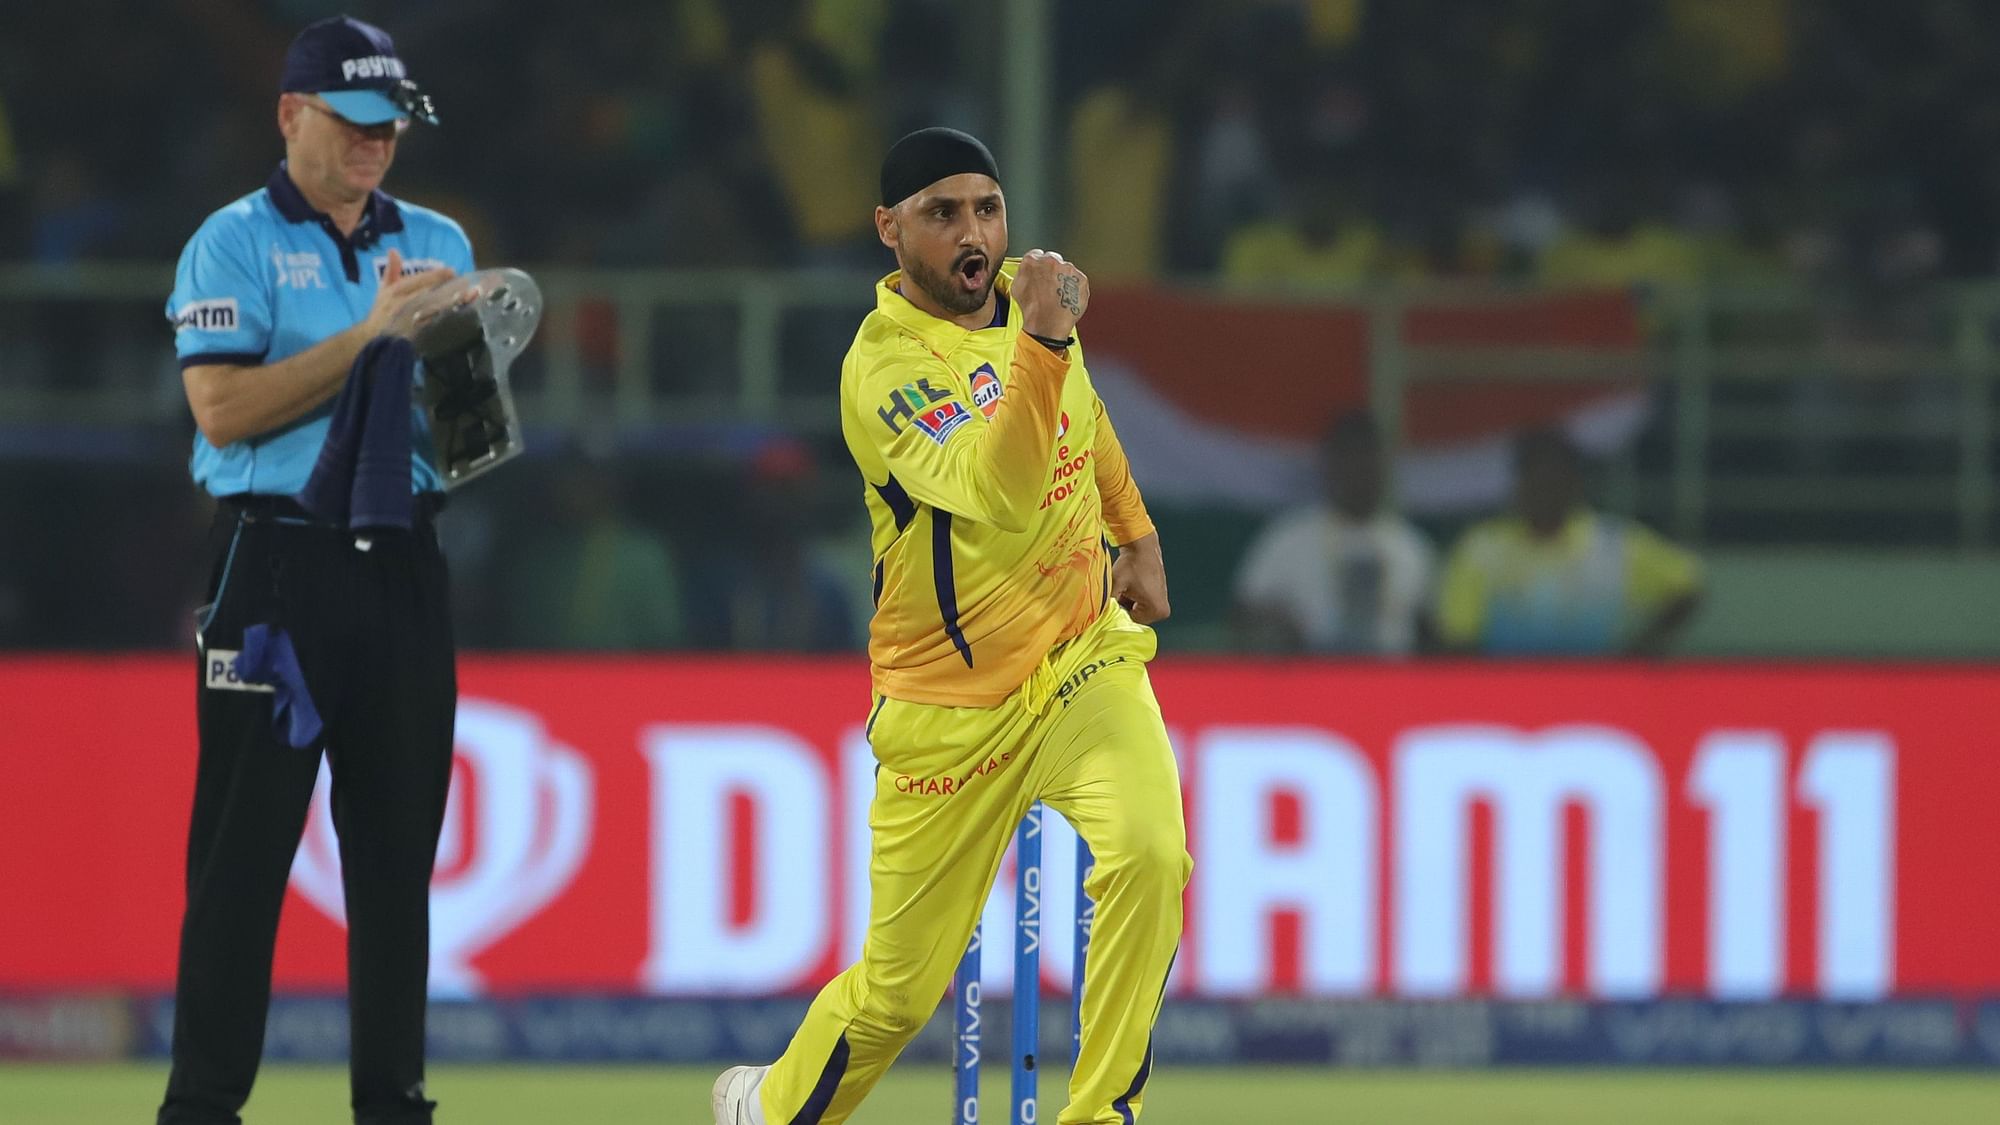 In his four overs against Delhi Capitals in Qualifier 2, Harbhajan Singh registered the figures of 2/31.